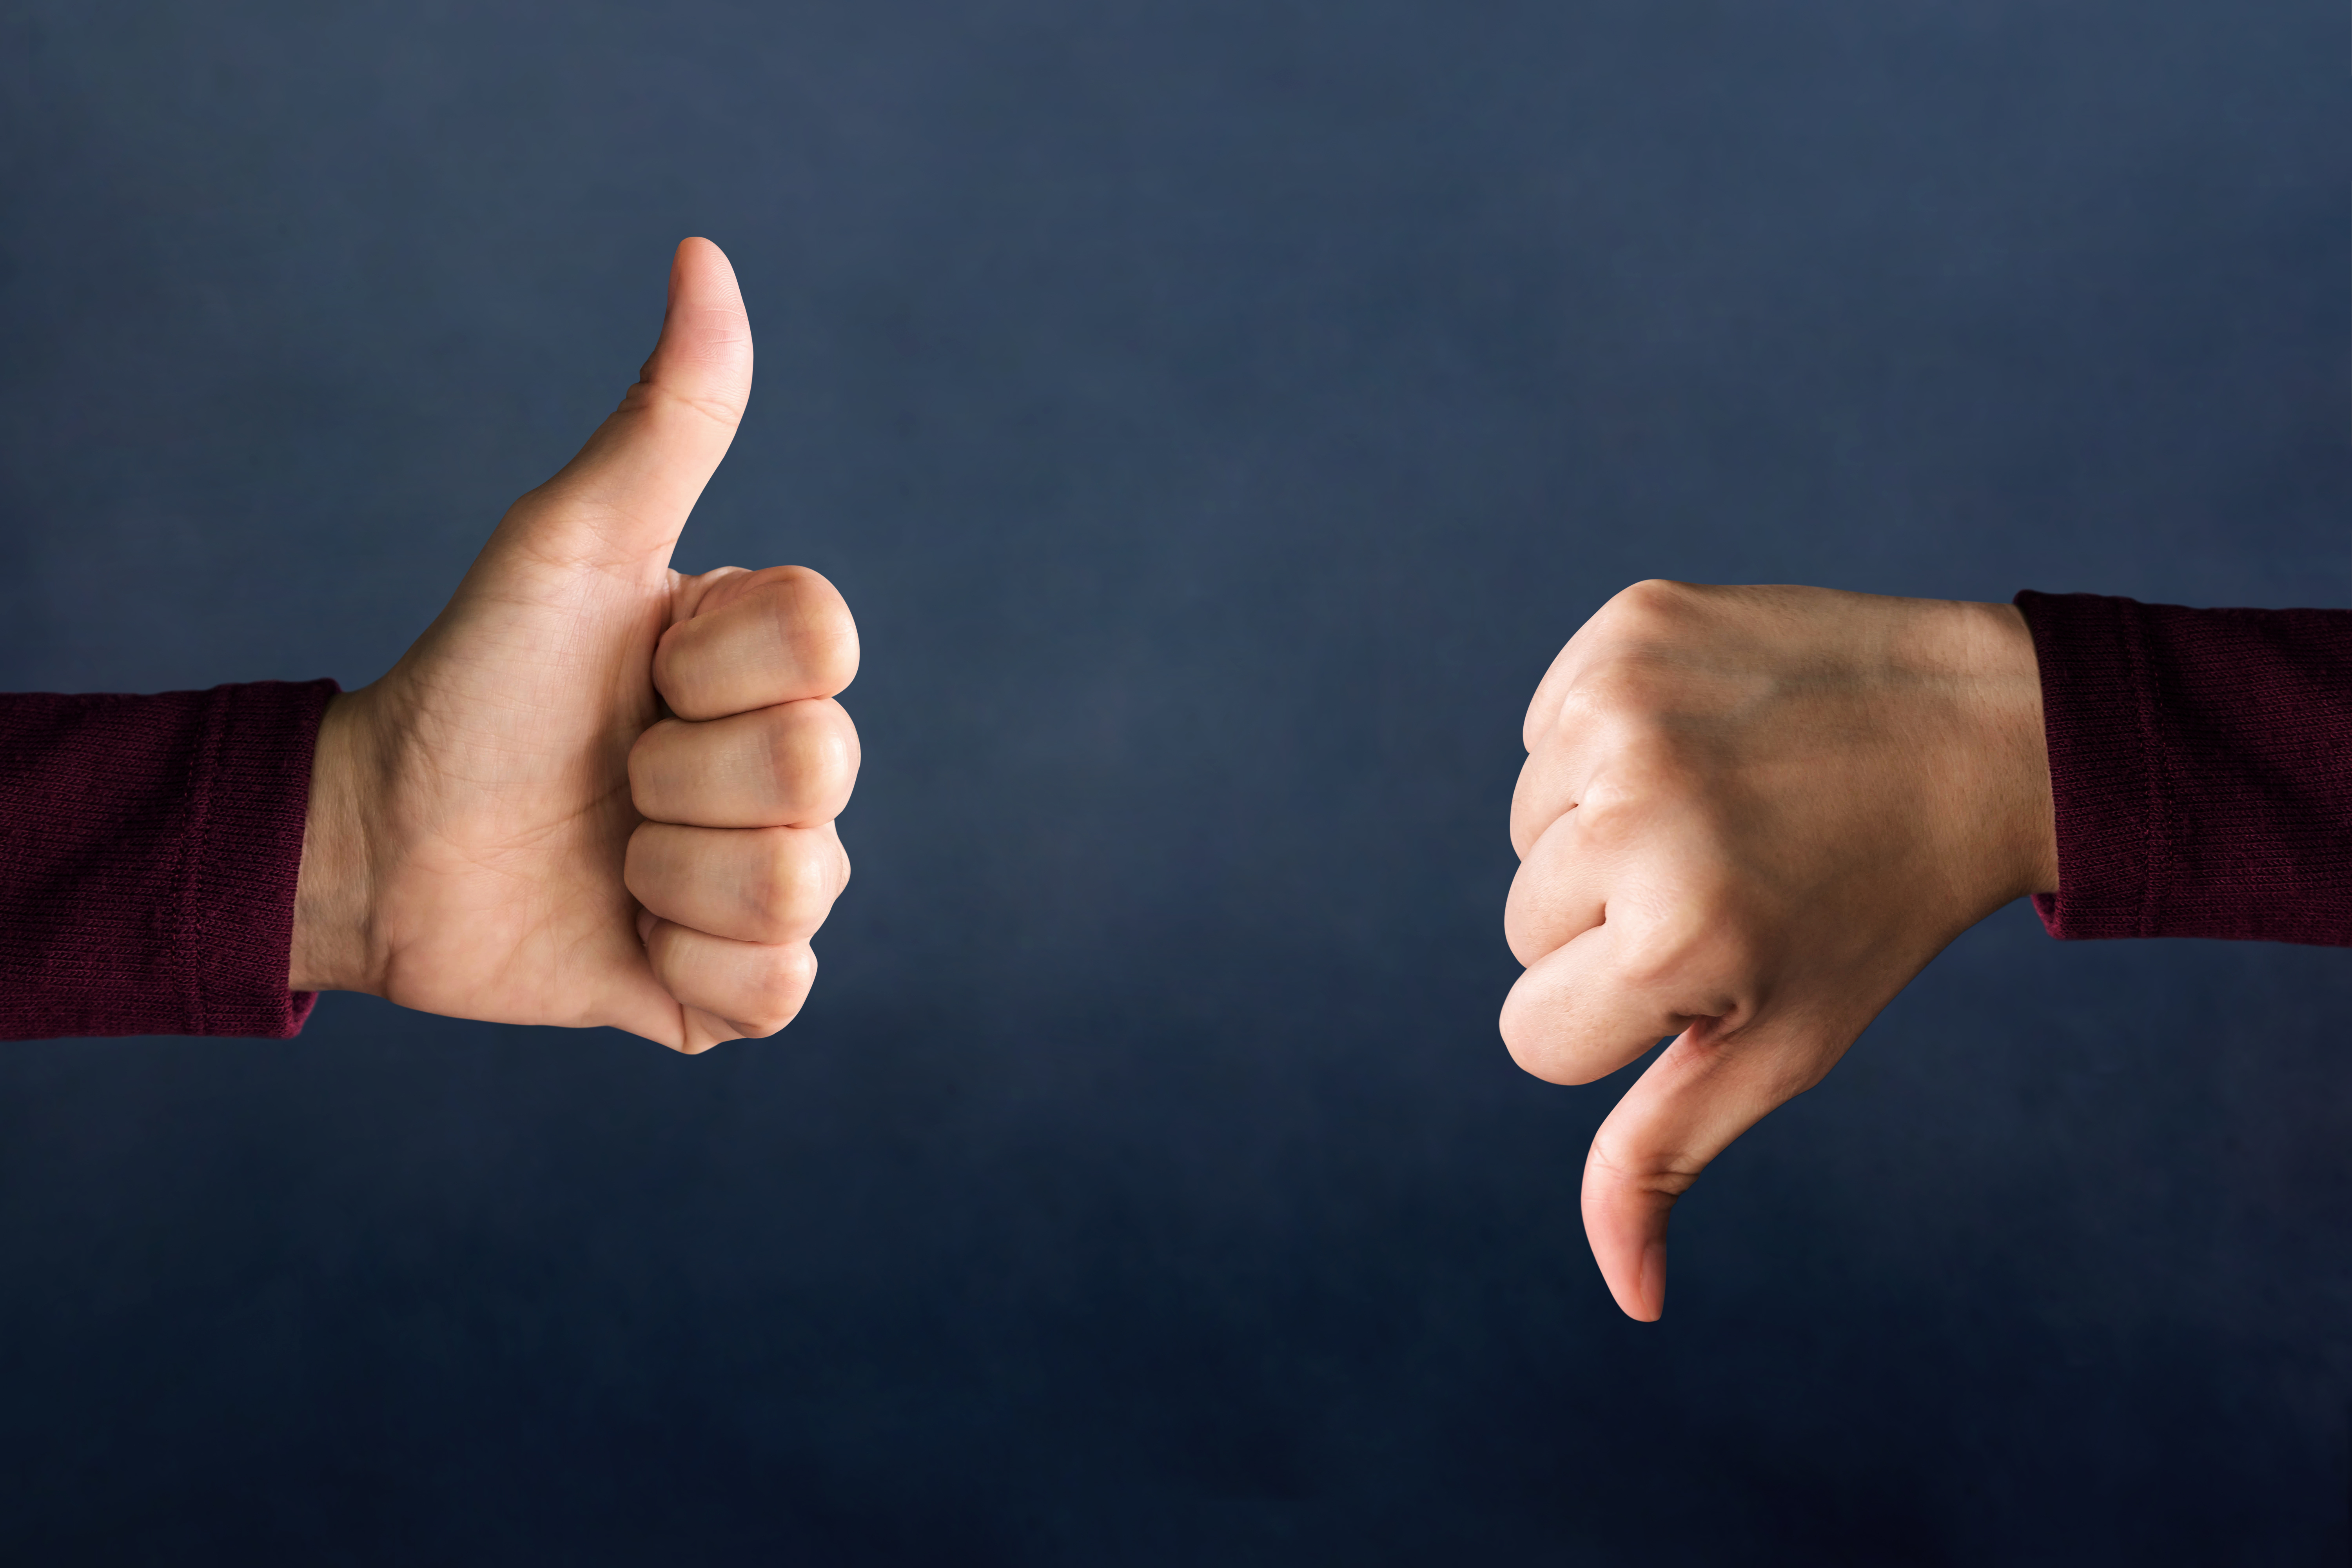 Two hands on either side of the photo, the one on the left shows a thumbs up and the one on the right shows a thumbs down, representing options available after the bankruptcy means test.